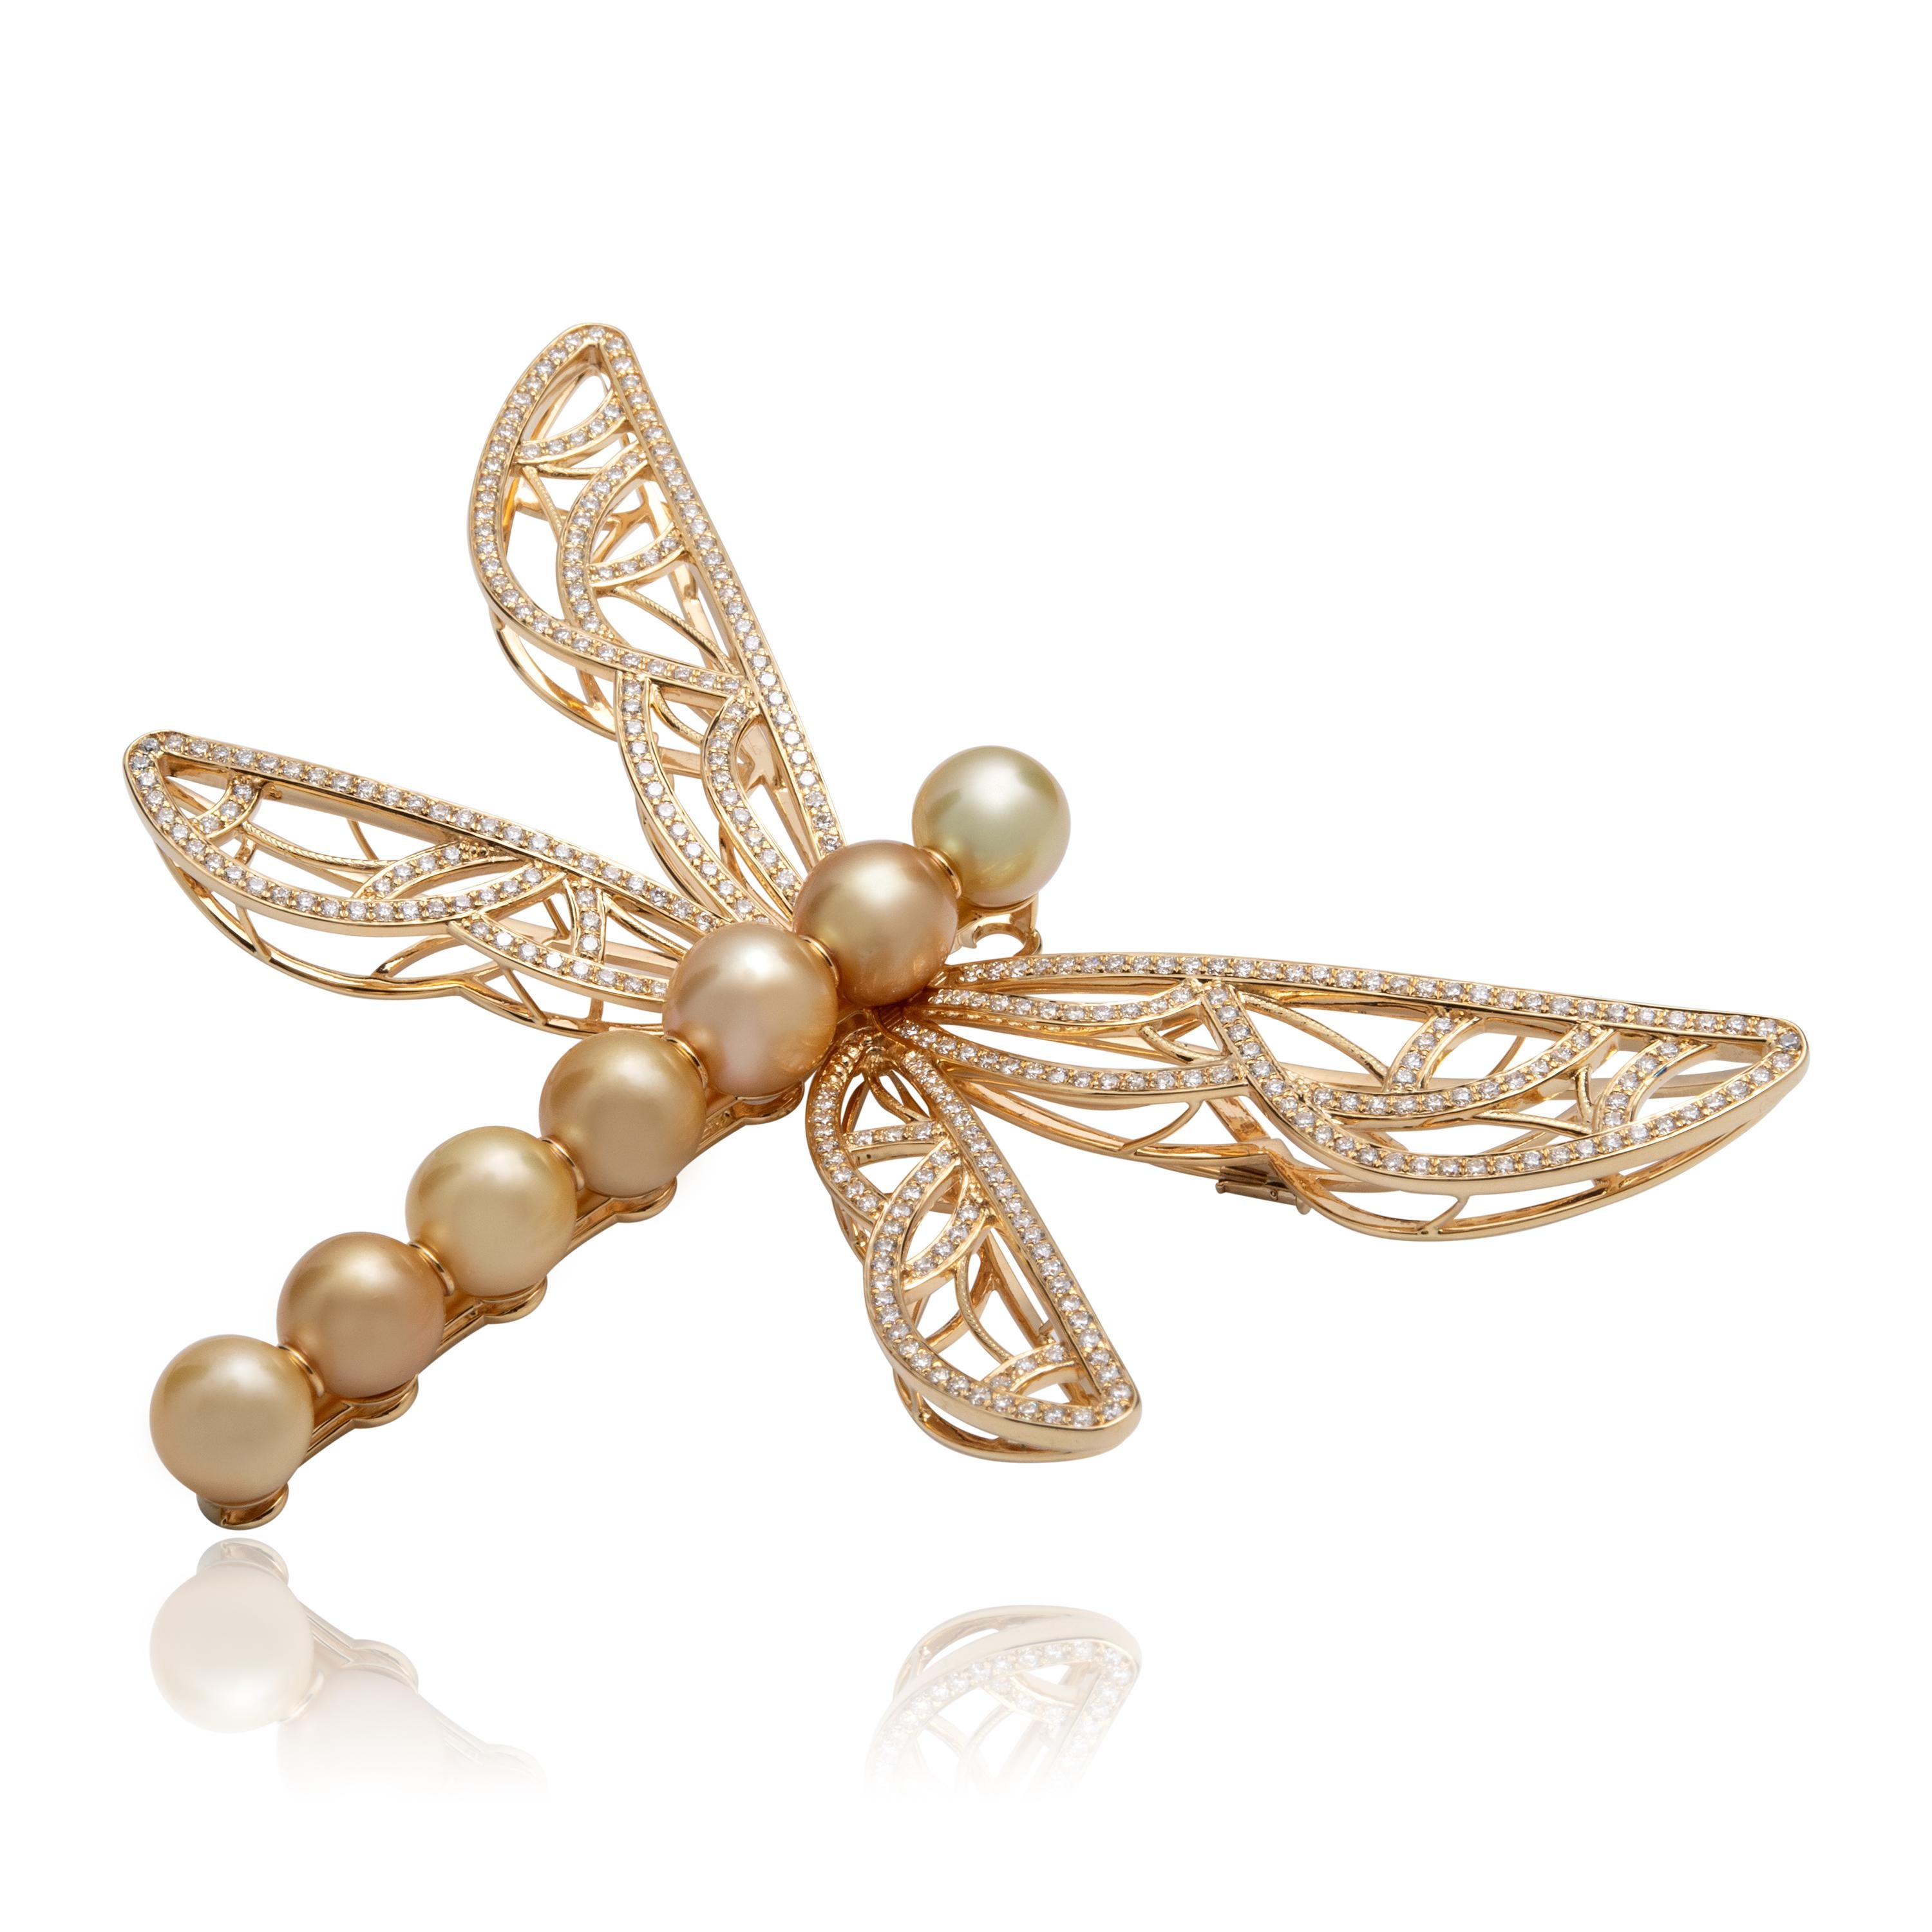 Collection: The Gem Made Me Do It
Title: “The Gold Dragonfly” Brooch and Pendant

These 7 Golden South Sea Pearls really wanted to be the body of a dragonfly.  2 minutes after she was shown these 7 pearls in a row by her Japanese Pearl trader , the